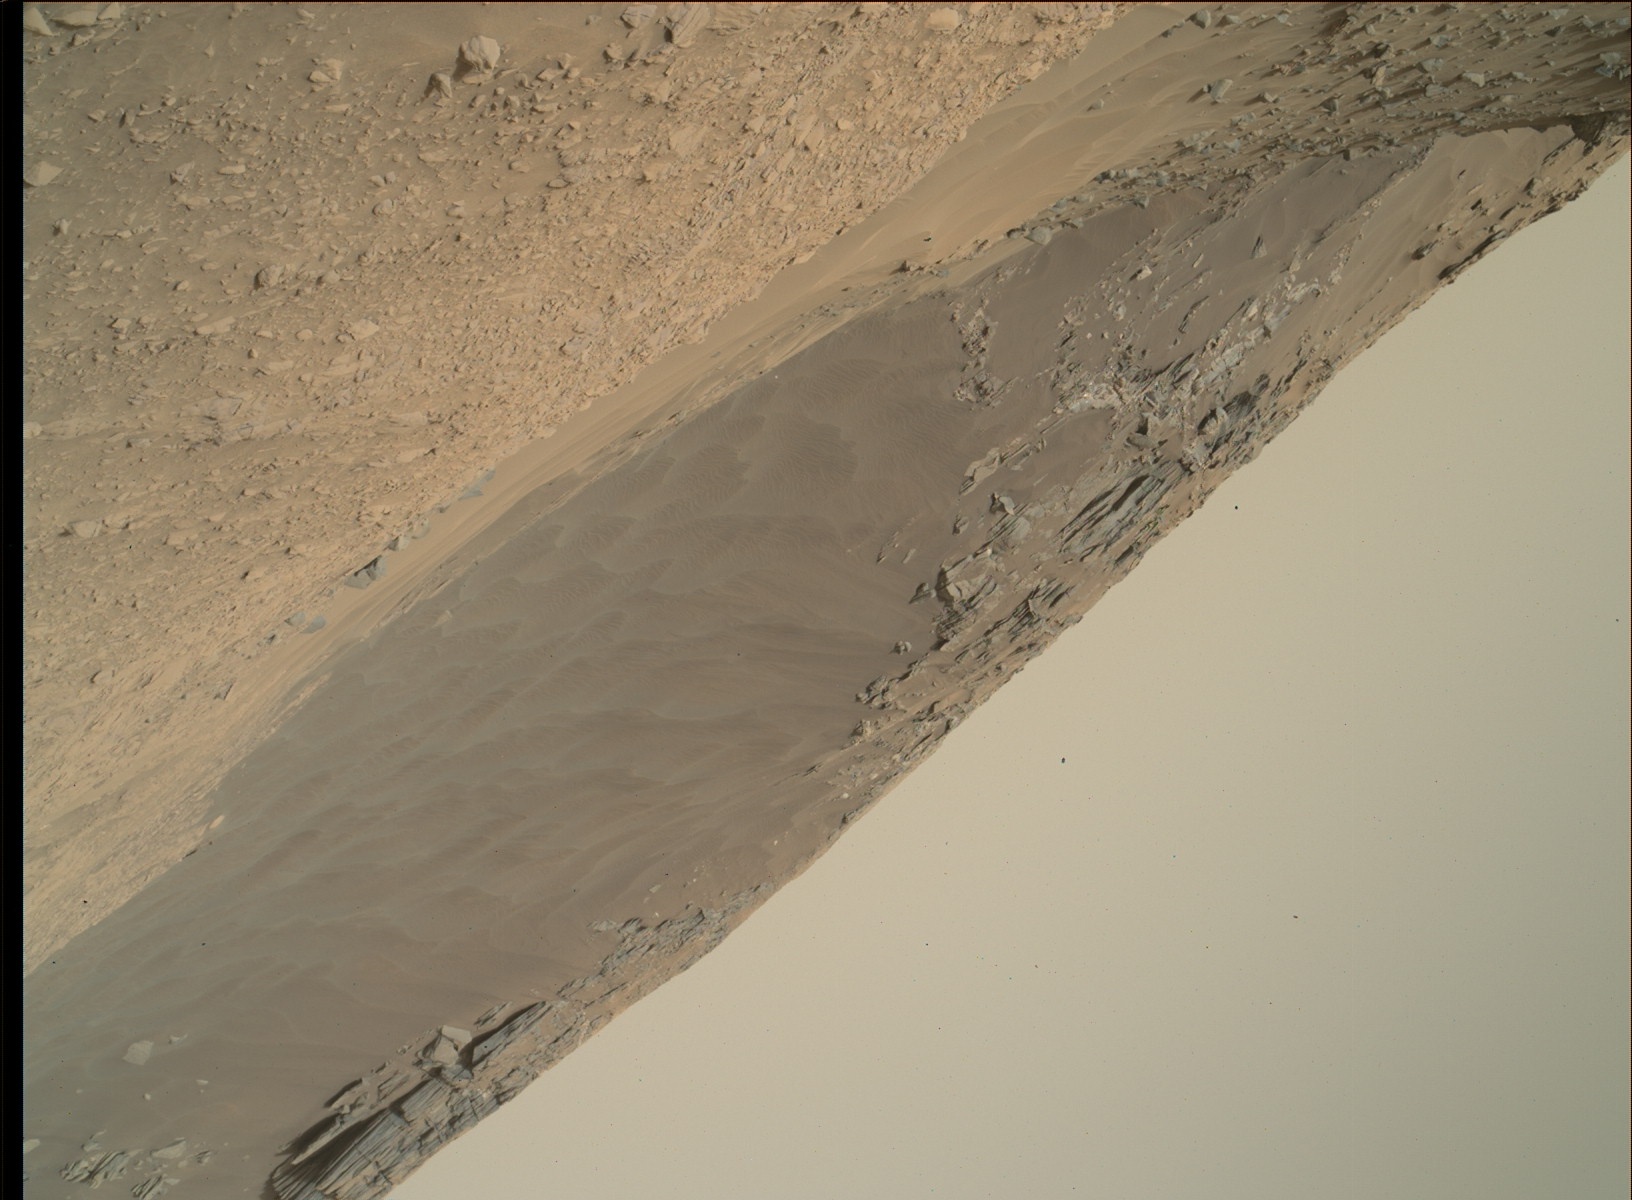 Nasa's Mars rover Curiosity acquired this image using its Mars Hand Lens Imager (MAHLI) on Sol 1376